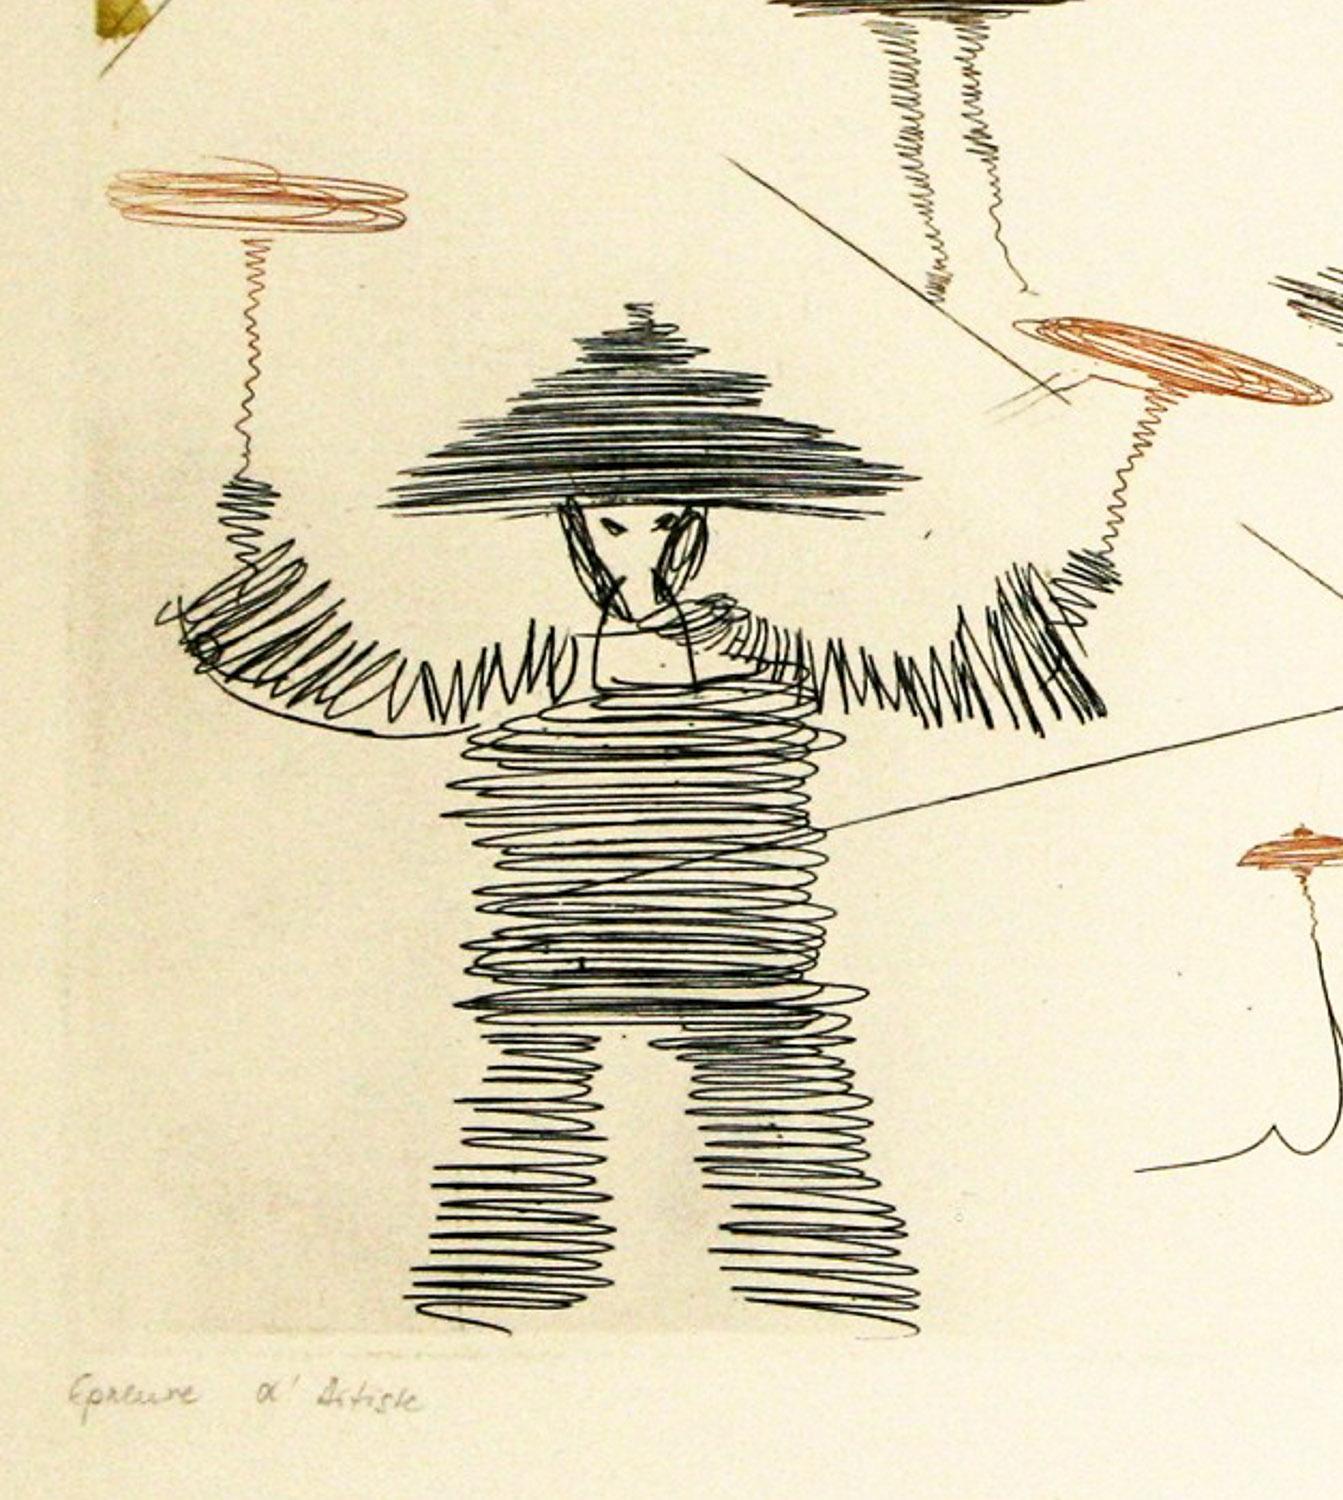 Chinois ( Theatre  Chinois ) etching by Salvador Dali - Print by Salvador Dalí